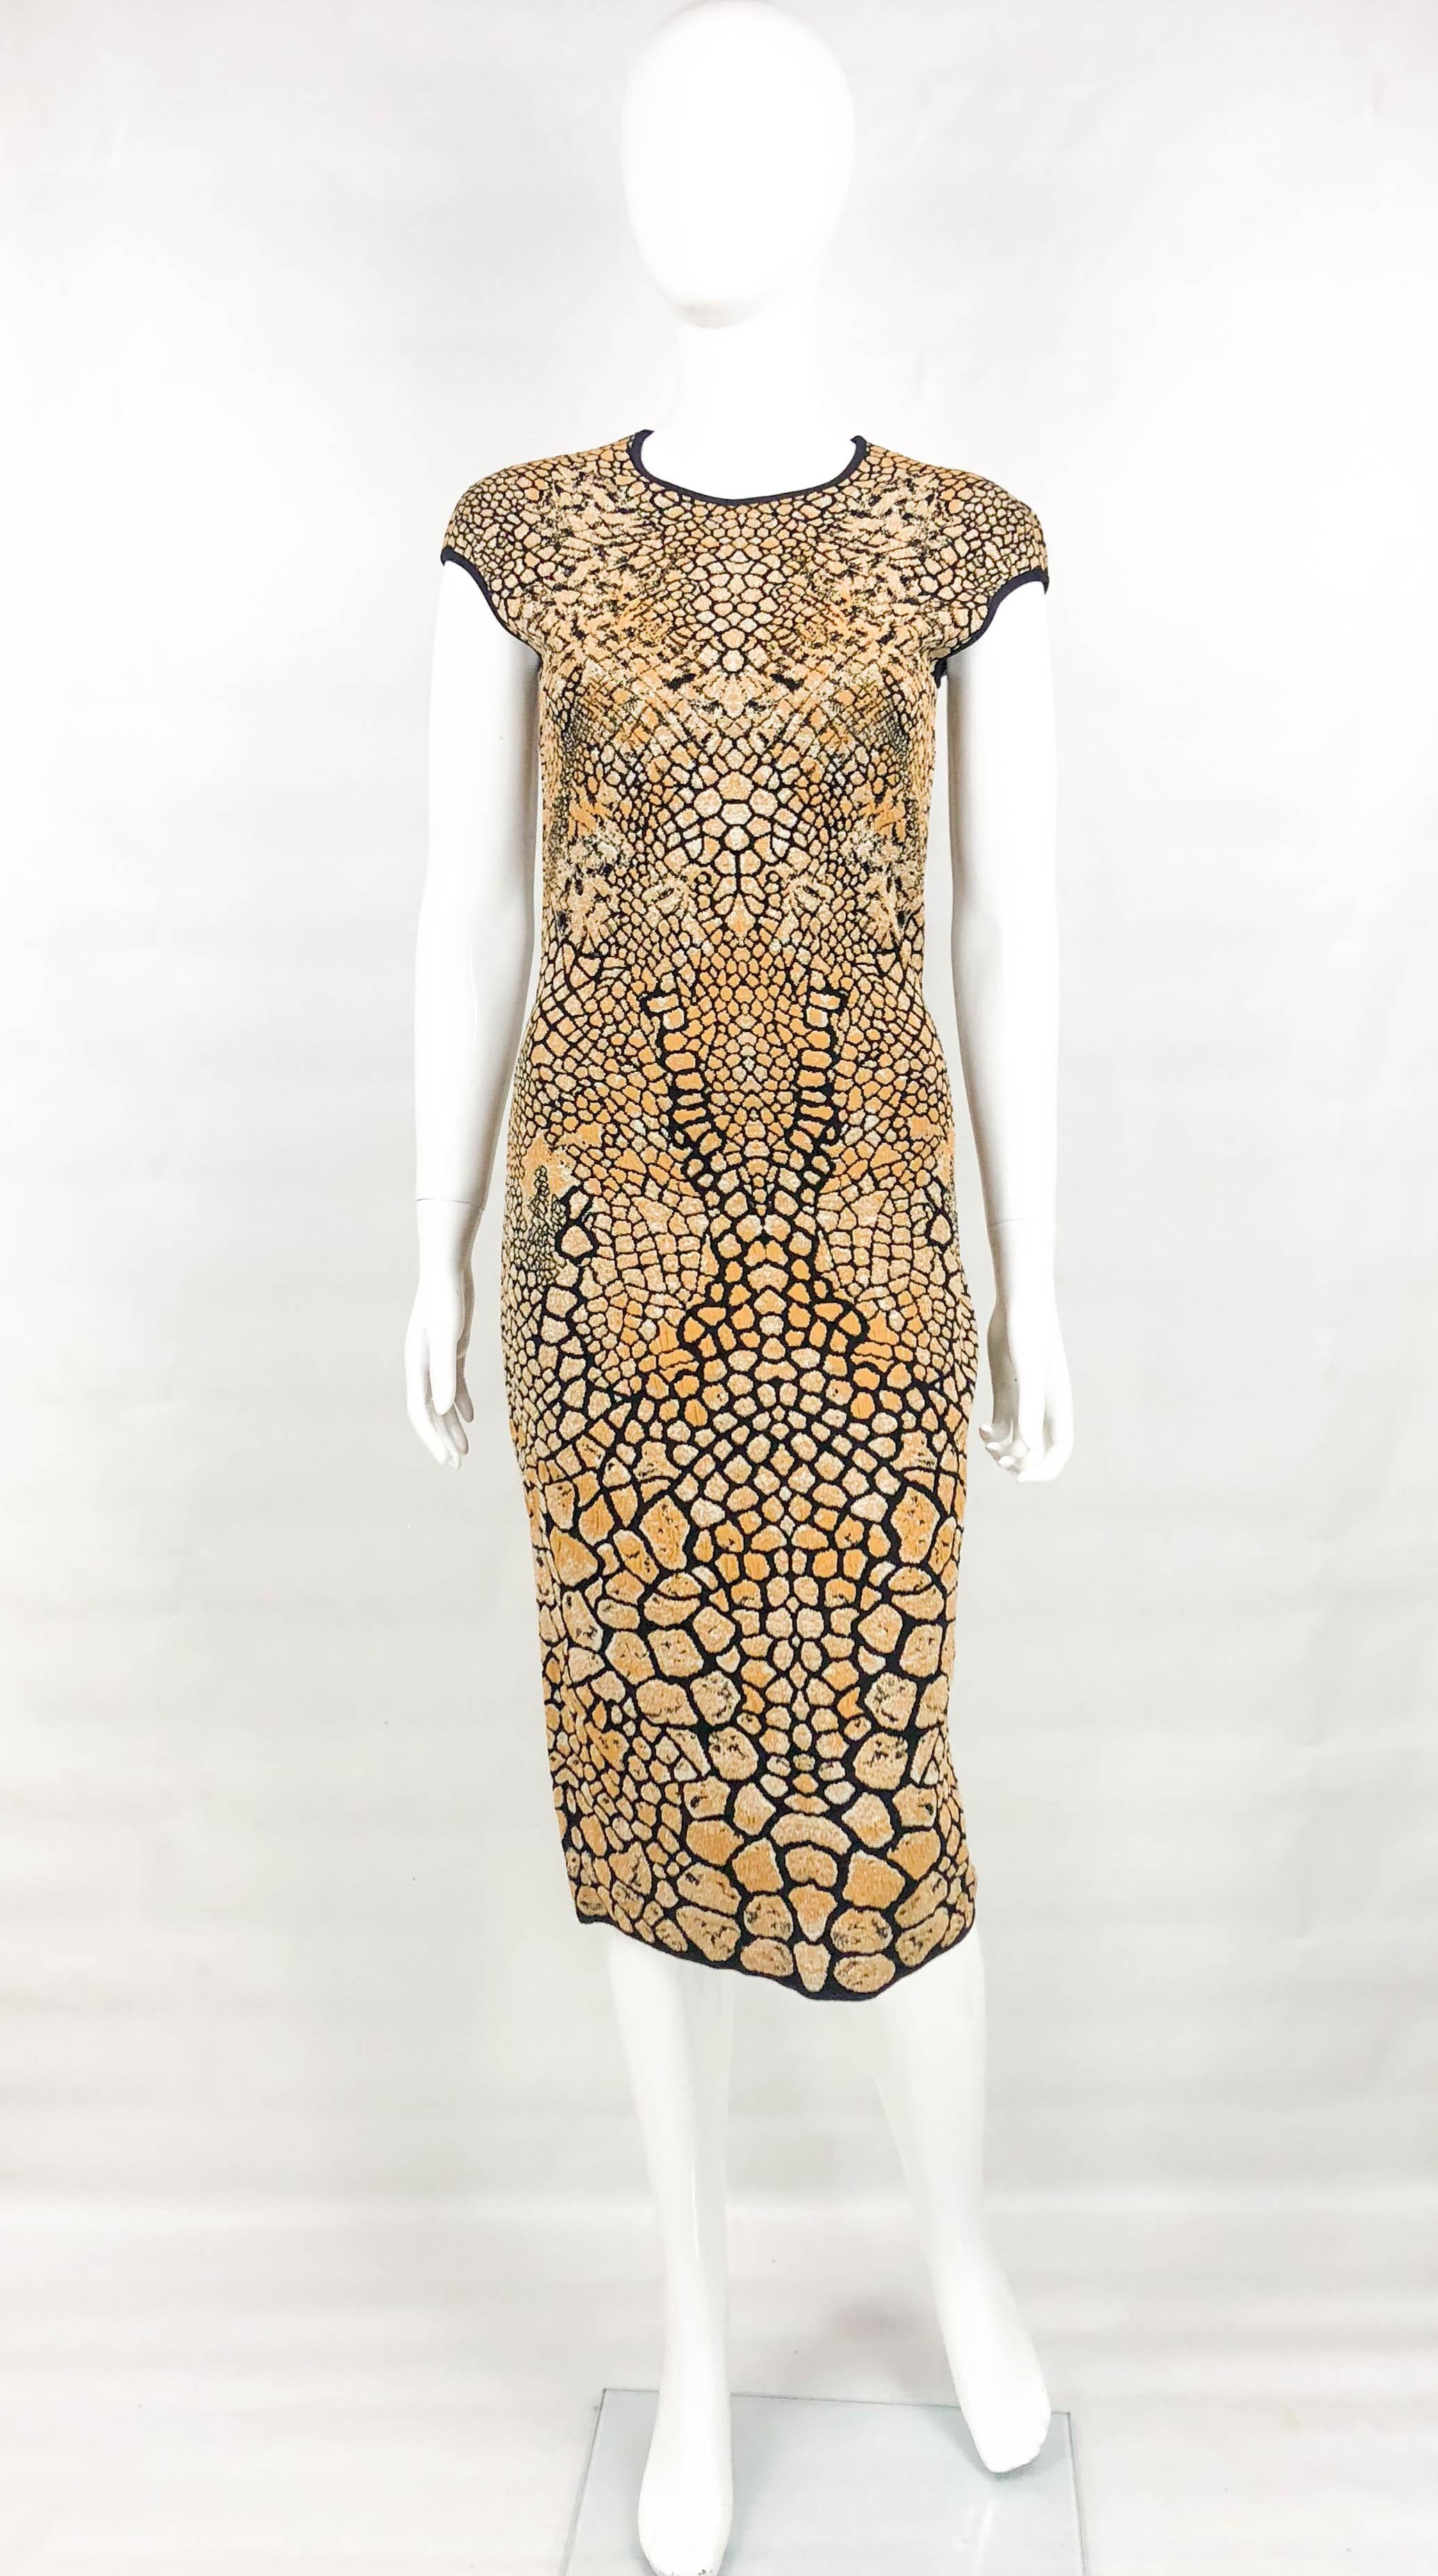 Alexander McQueen Stretch Knit Golden and Black Dress. This beautiful midi dress by Alexander McQueen dates back from 2009. Made in a stretch knitted fabric in accents of golden and black, it features a pattern inspired by bees. It is figure hugging